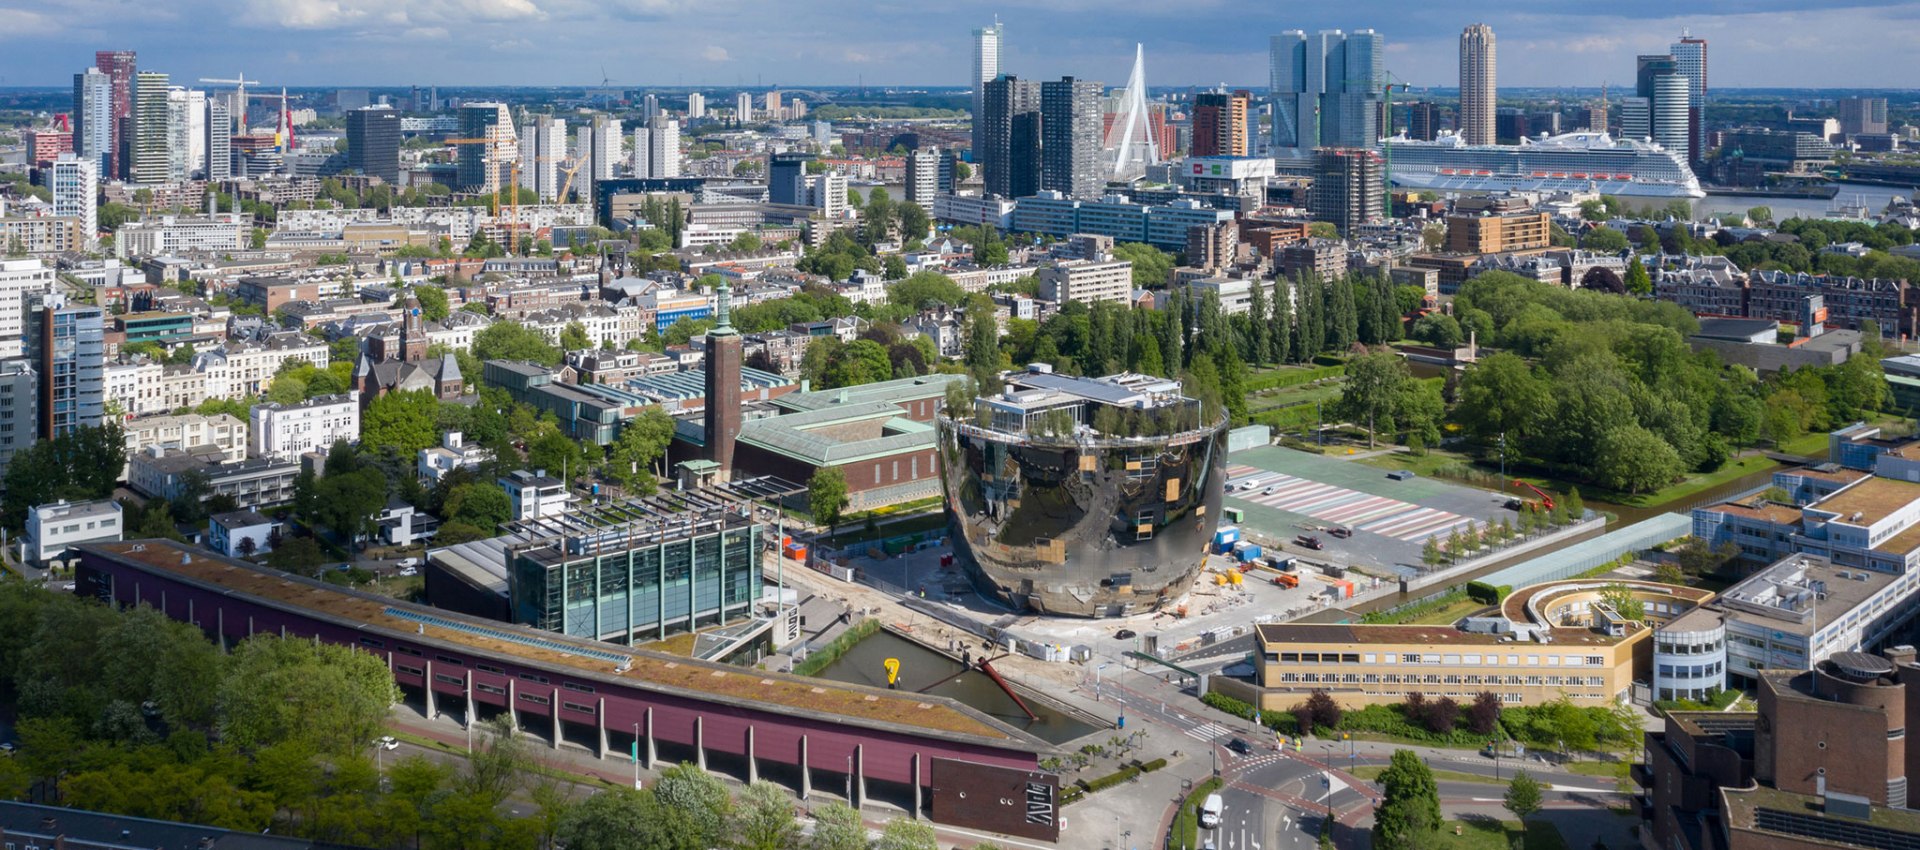 Rotterdam, Best Architecture Guide. 20 works (or more) understand why is the largest design laboratory in Europe | The Strength of Architecture | From 1998